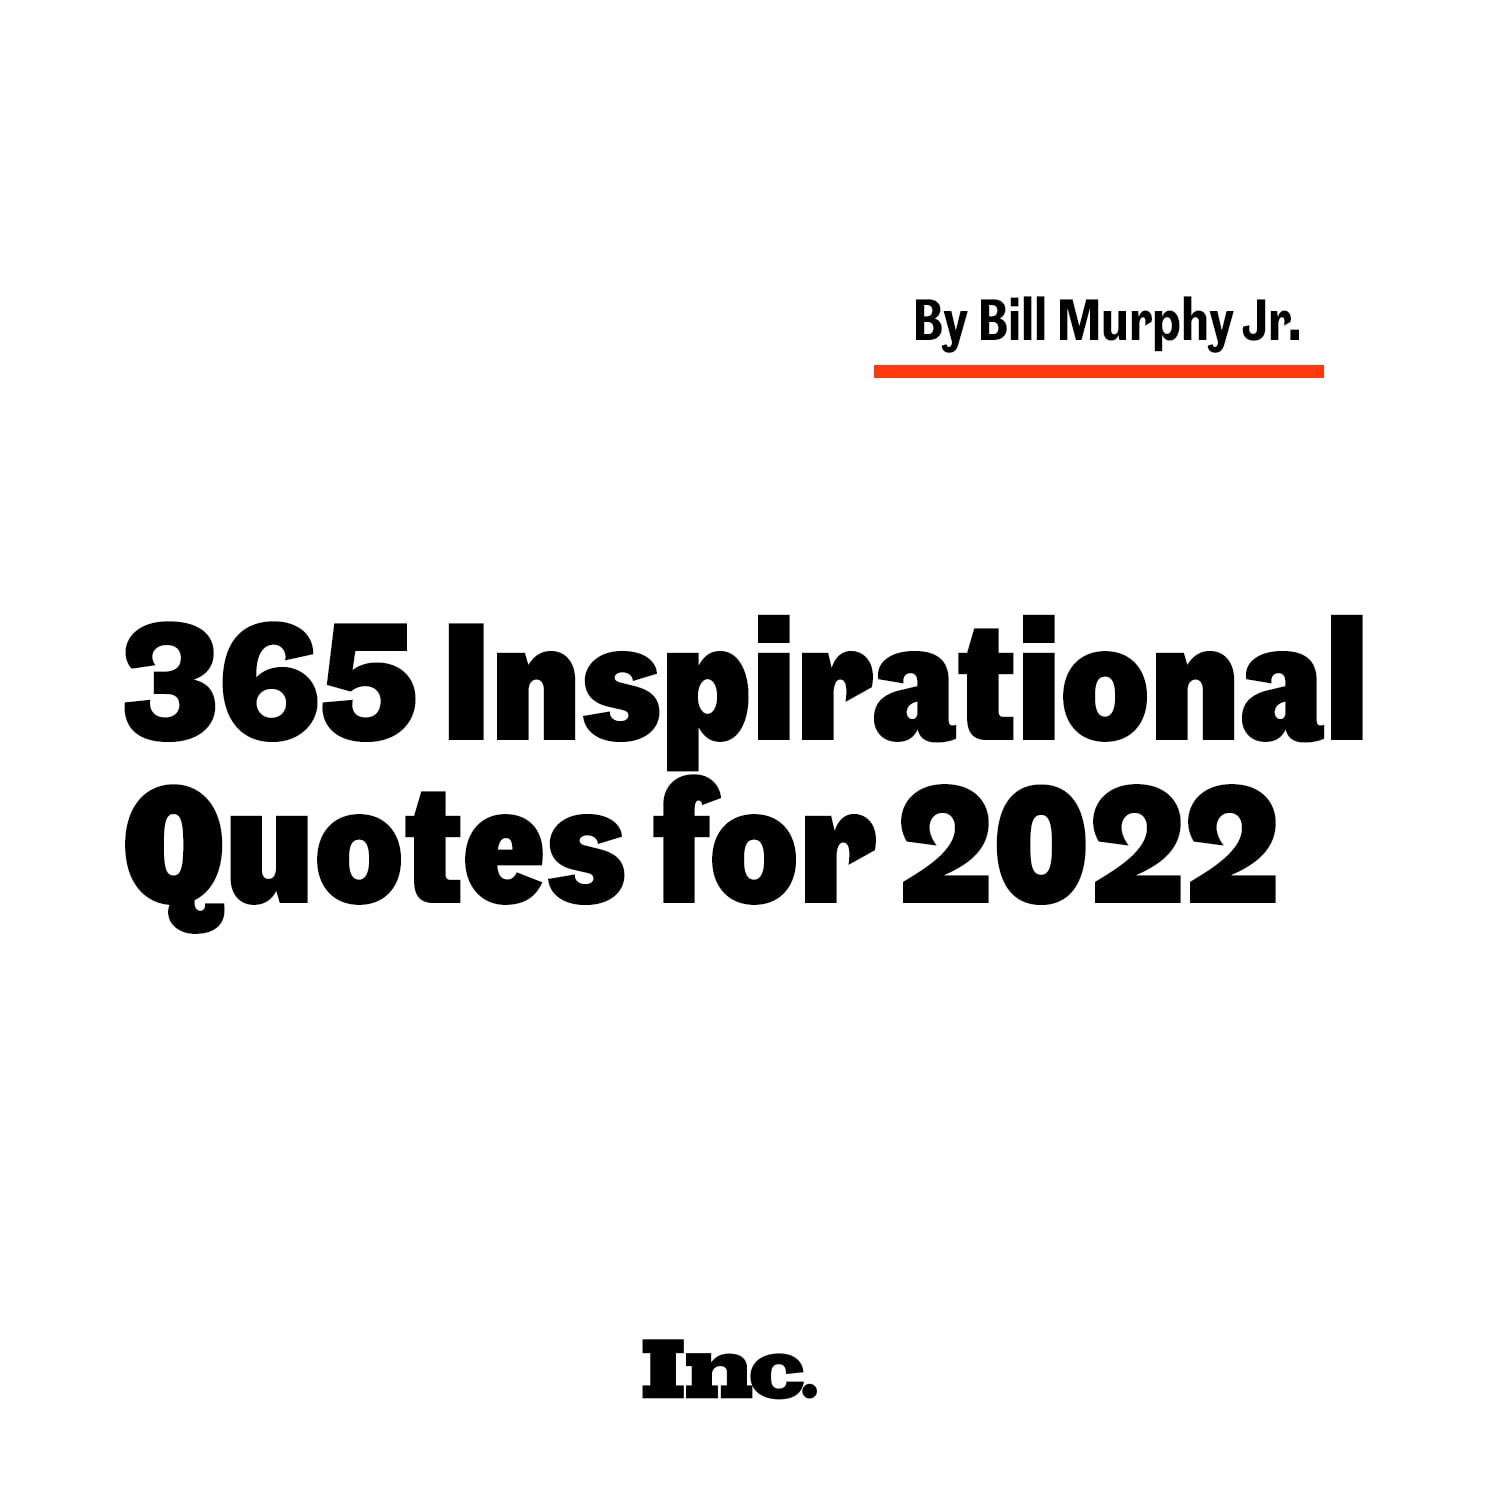 Looking for some inspiration in 2022?